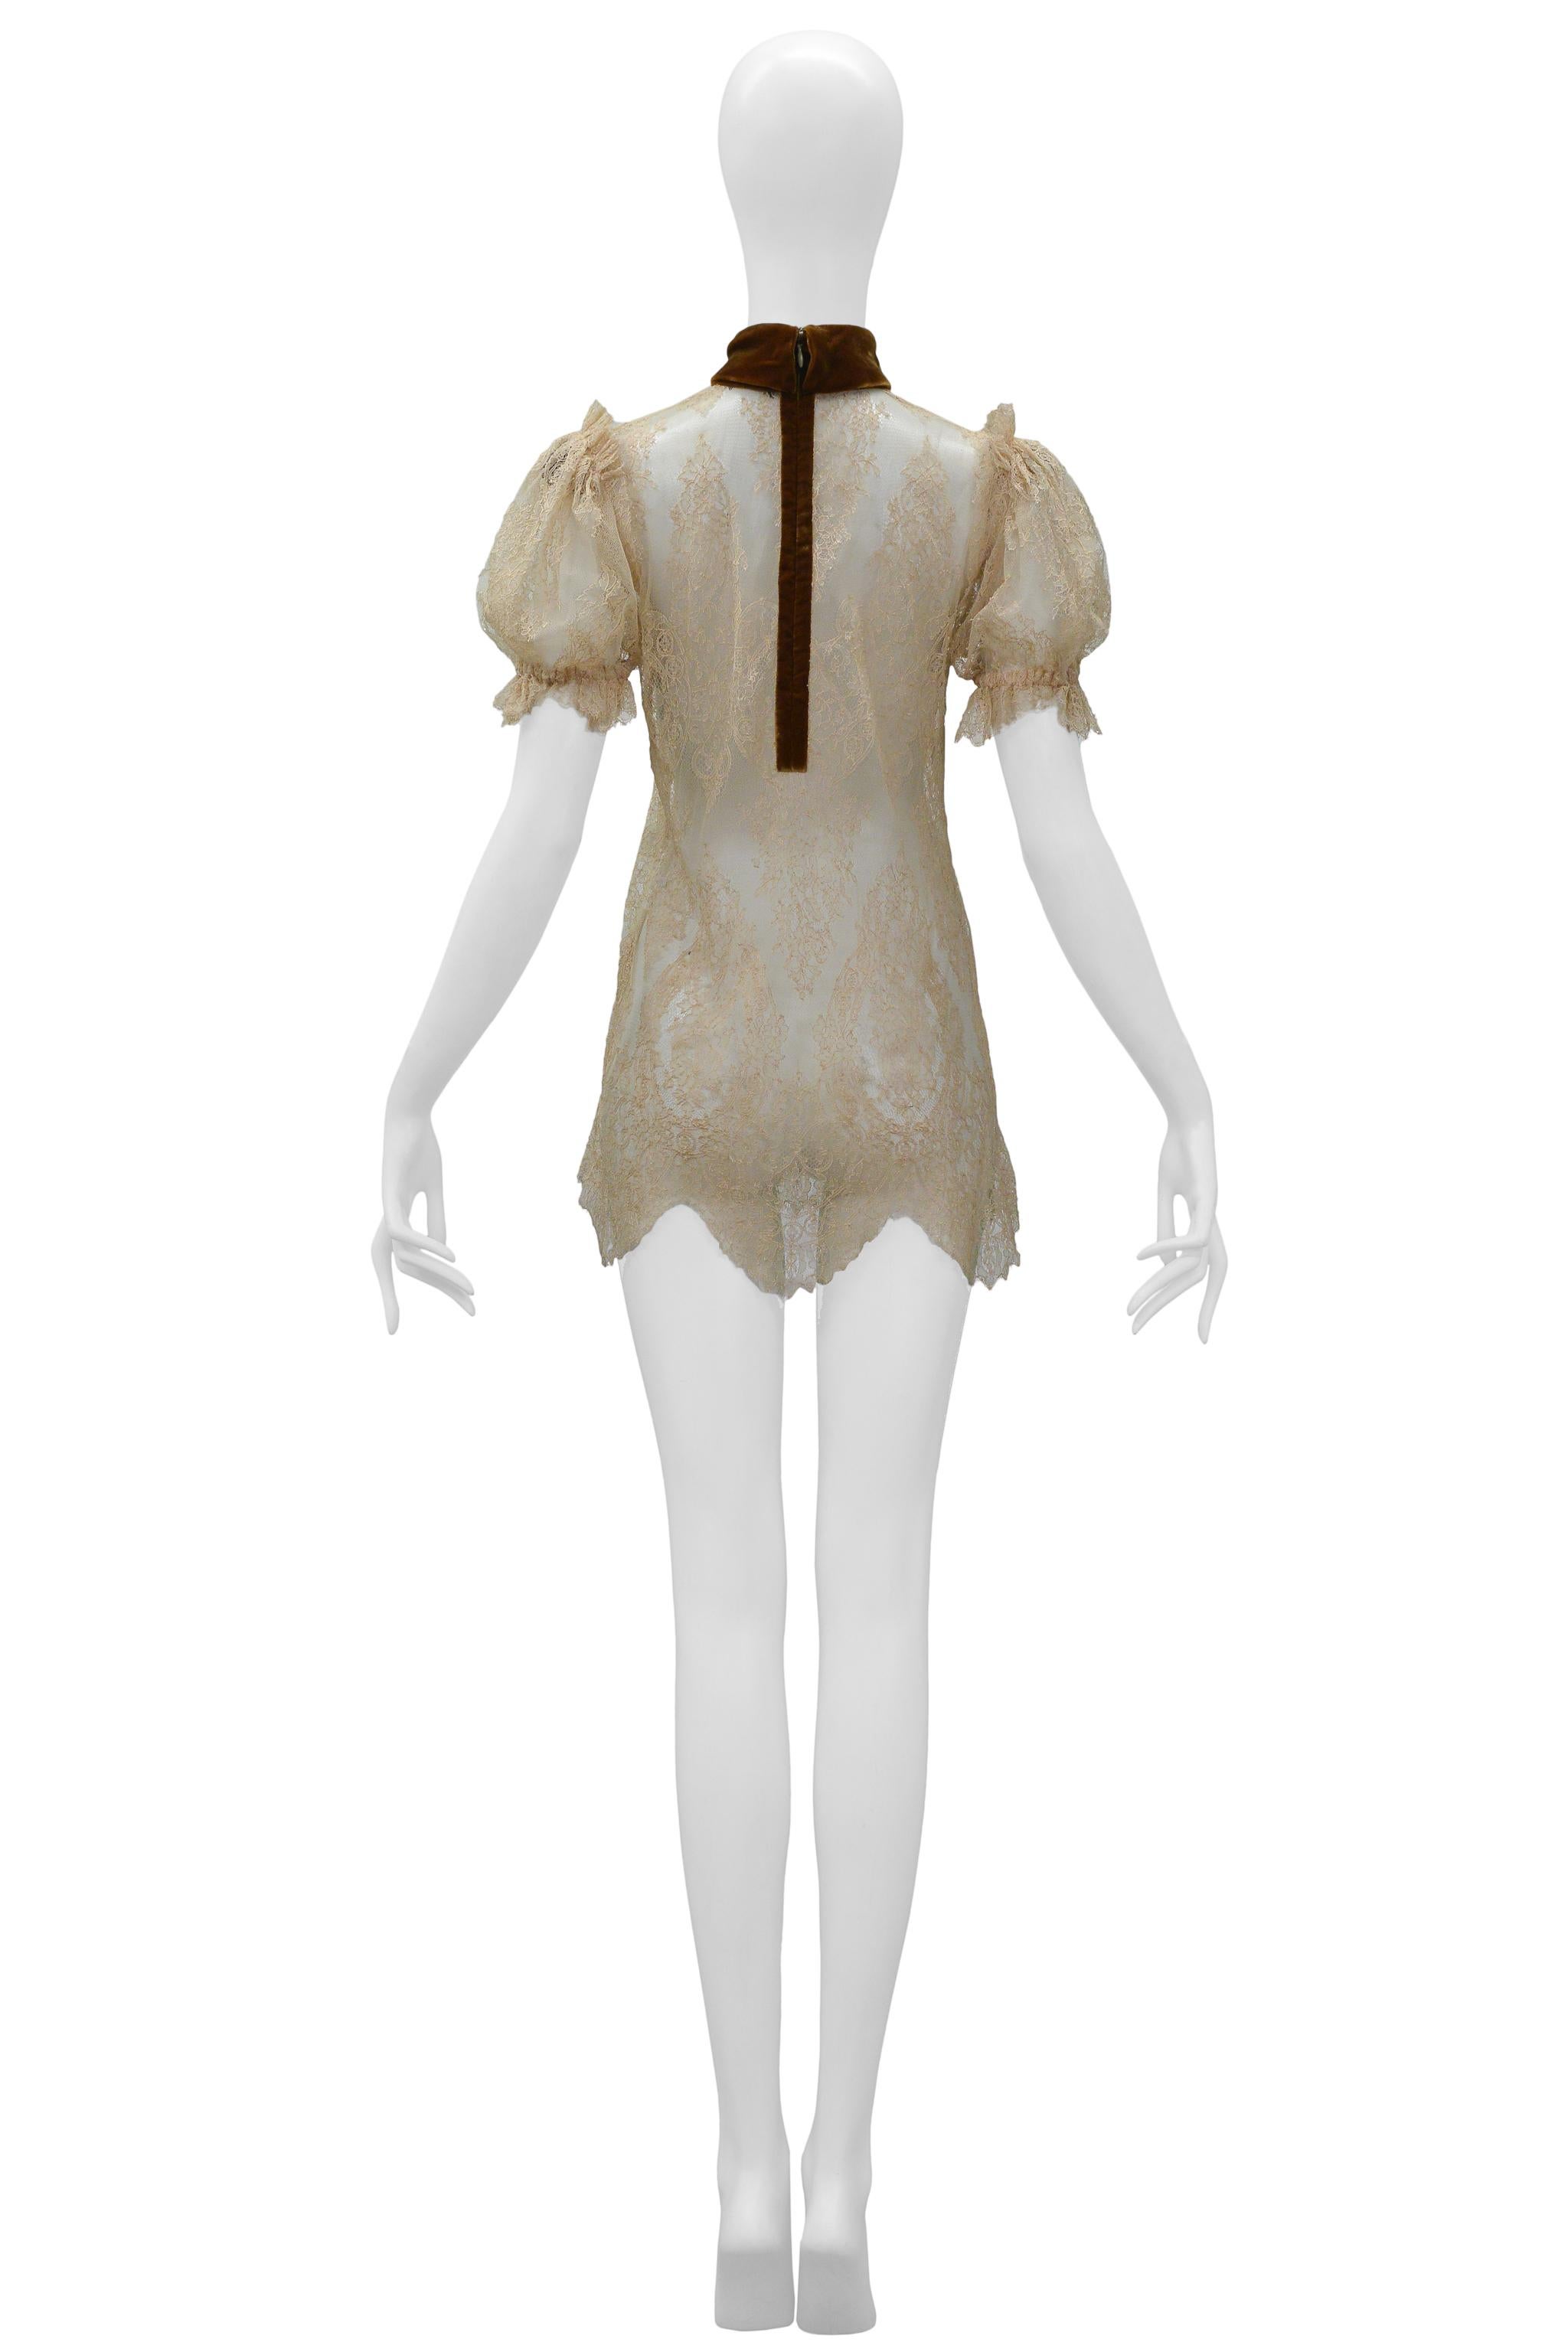 Dolce & Gabbana Off White Lace Mini Dress With Velvet Collar 2001 For Sale 4